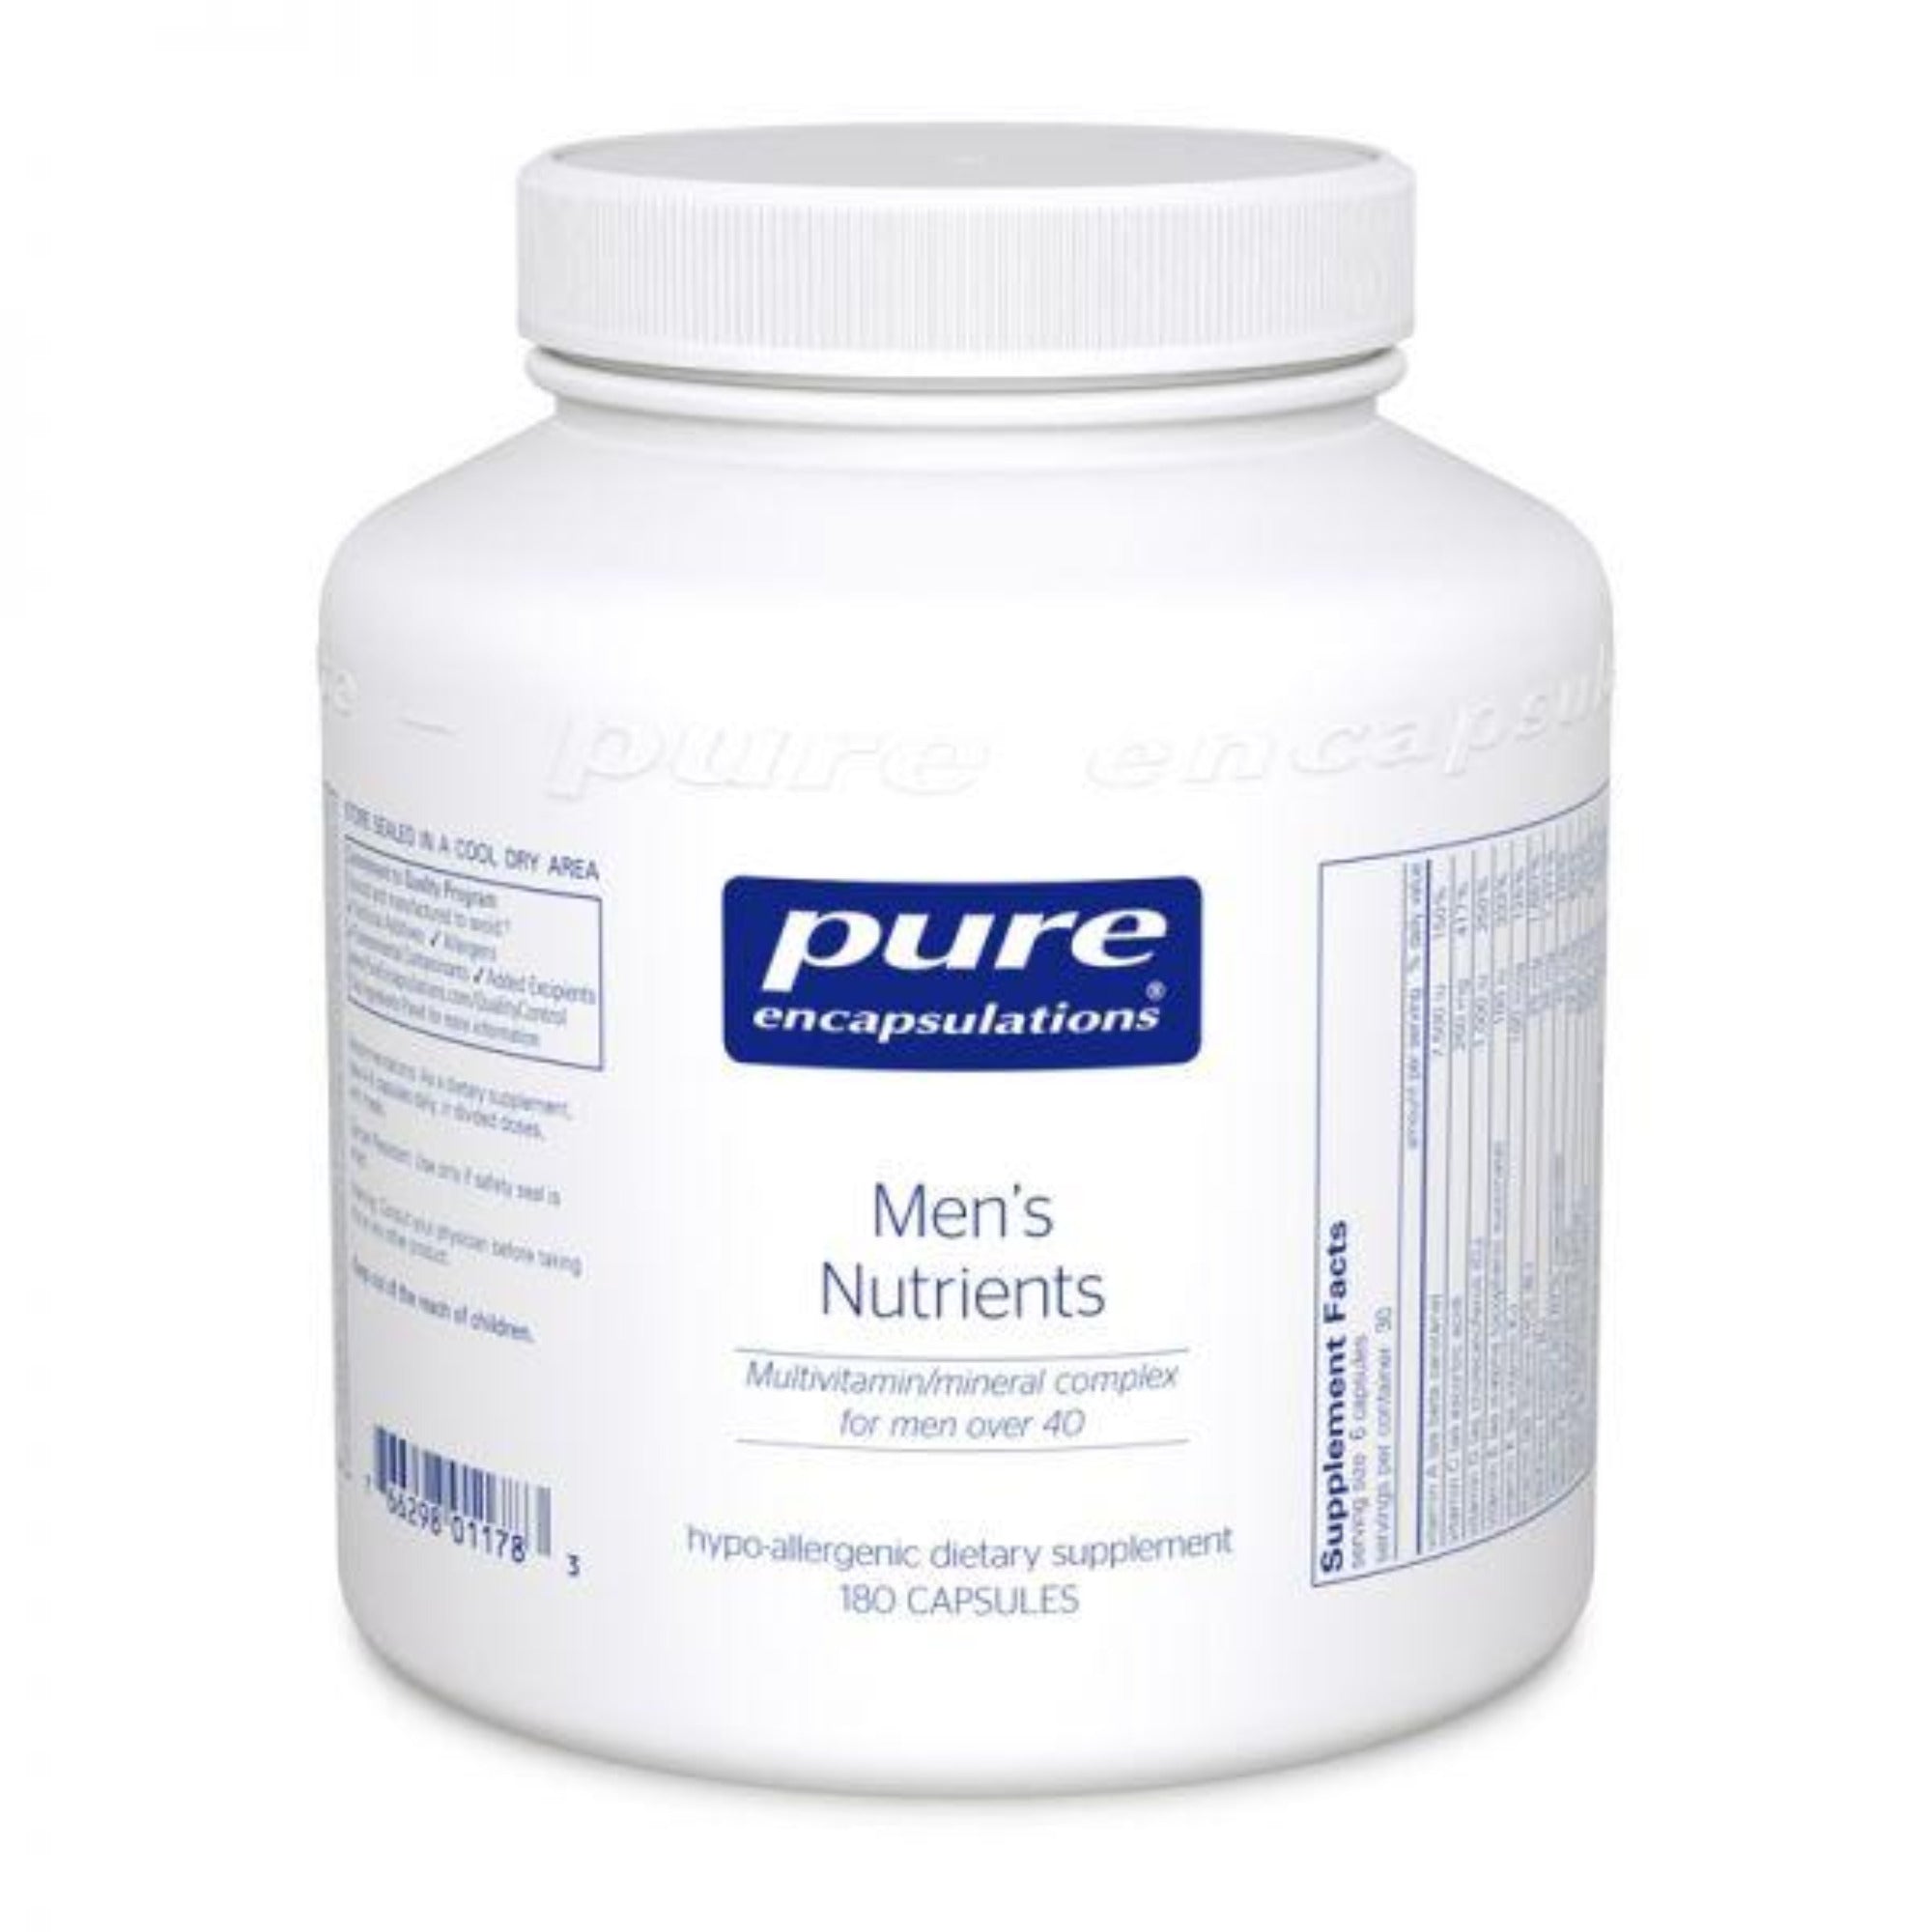 Pure Encapsulations - Women's Nutrients - Hypoallergenic  Multivitamin/Mineral Complex for Women* - 180 Vegetable Capsules